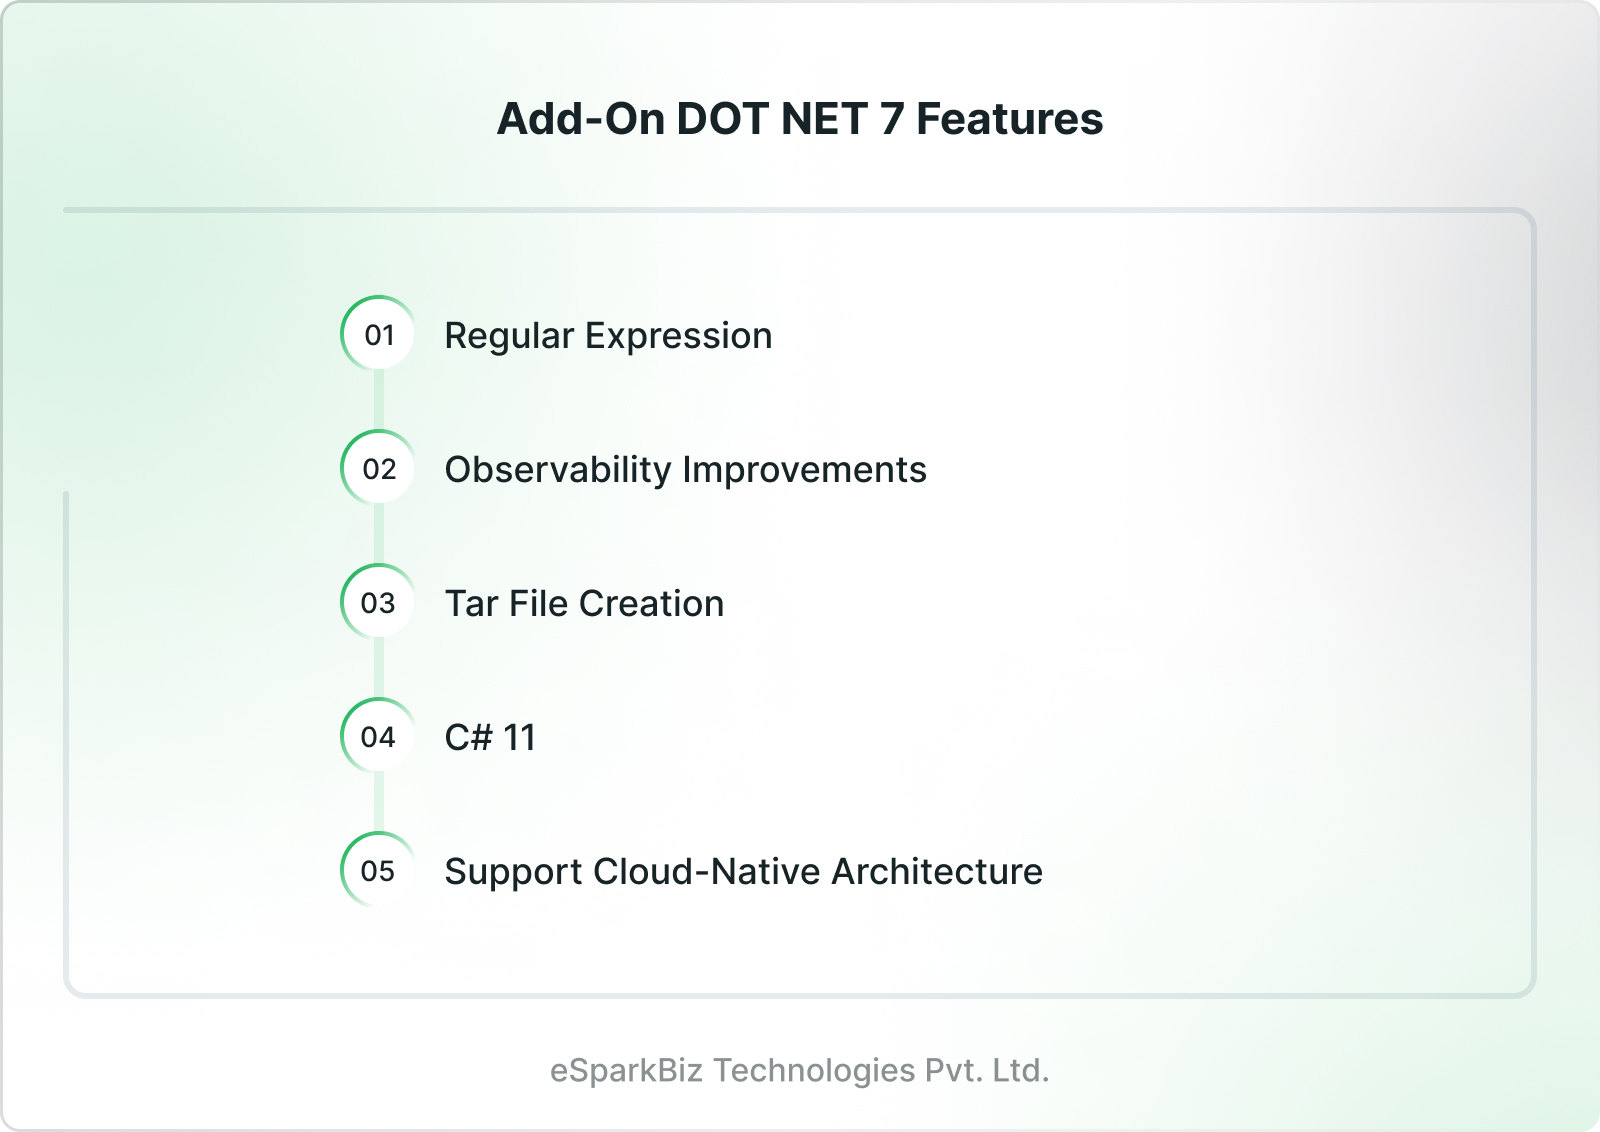 Add-on DOT NET 7 Features